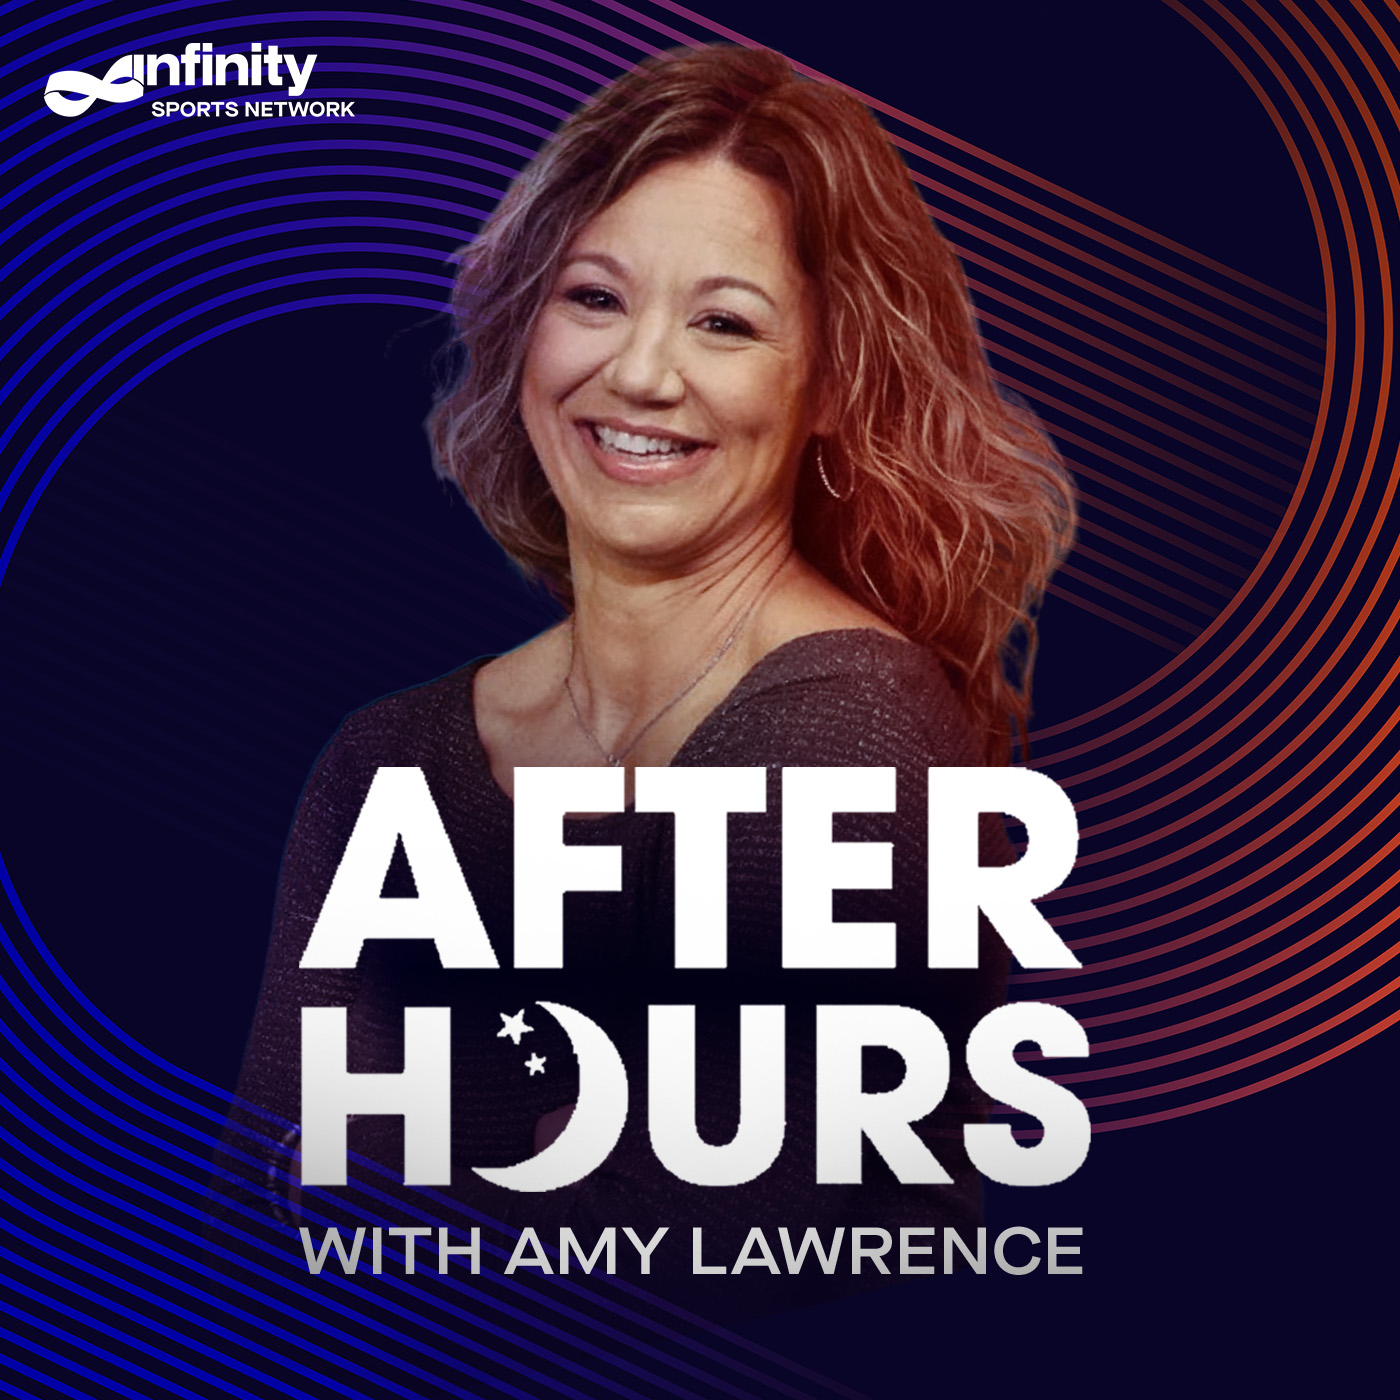 1-5-22 After Hours with Amy Lawrence PODCAST: Hour 2